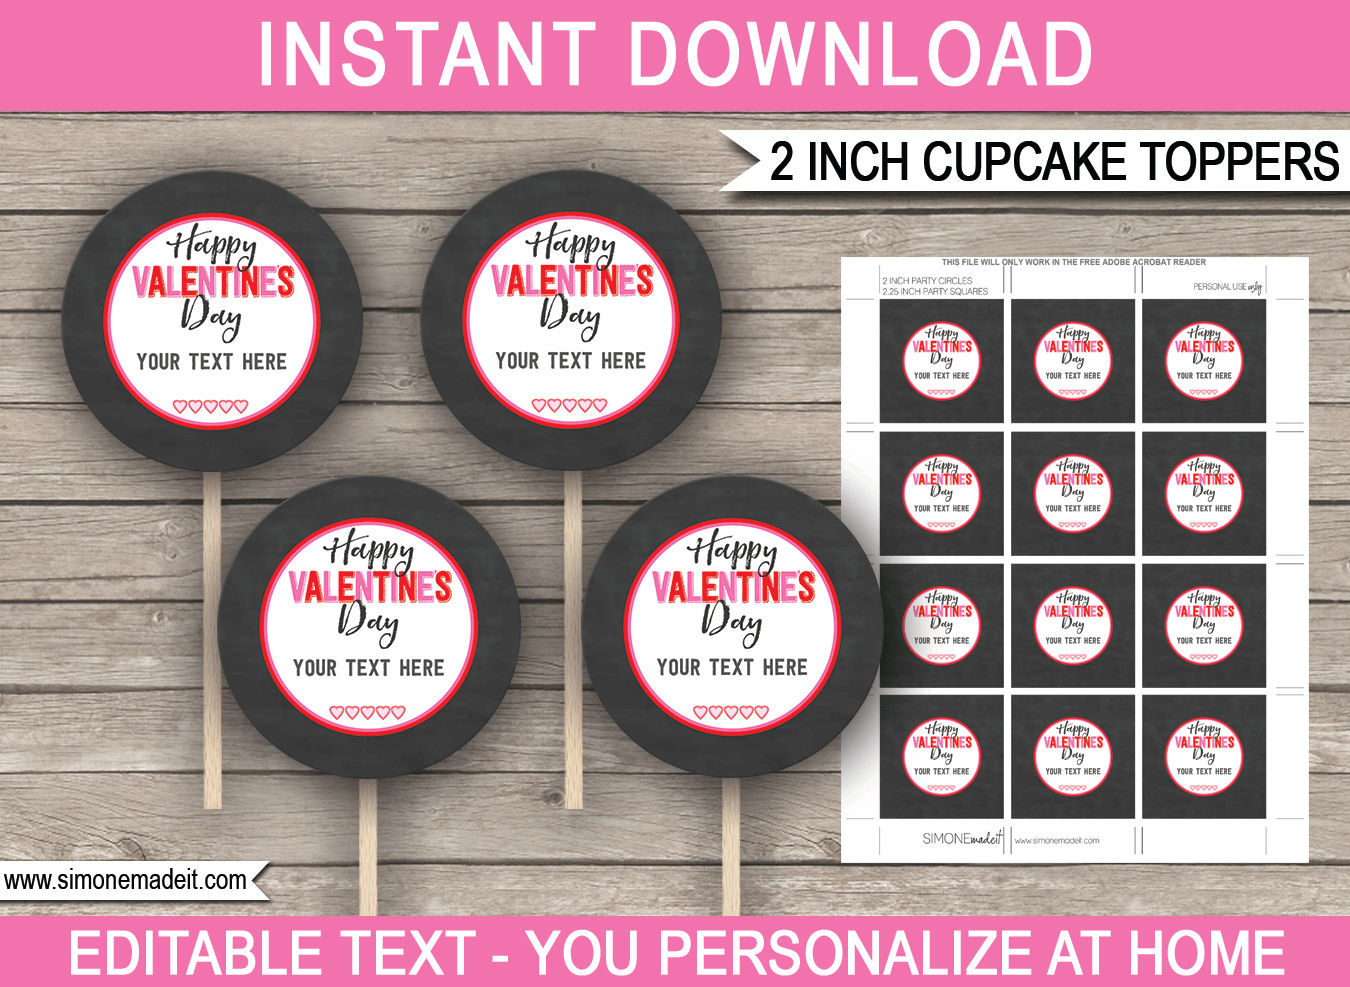 Free Valentine's Day Cupcake Toppers | 2 inch | Gift Tags | DIY Editable & Printable Template | INSTANT DOWNLOAD via simonemadeit.com